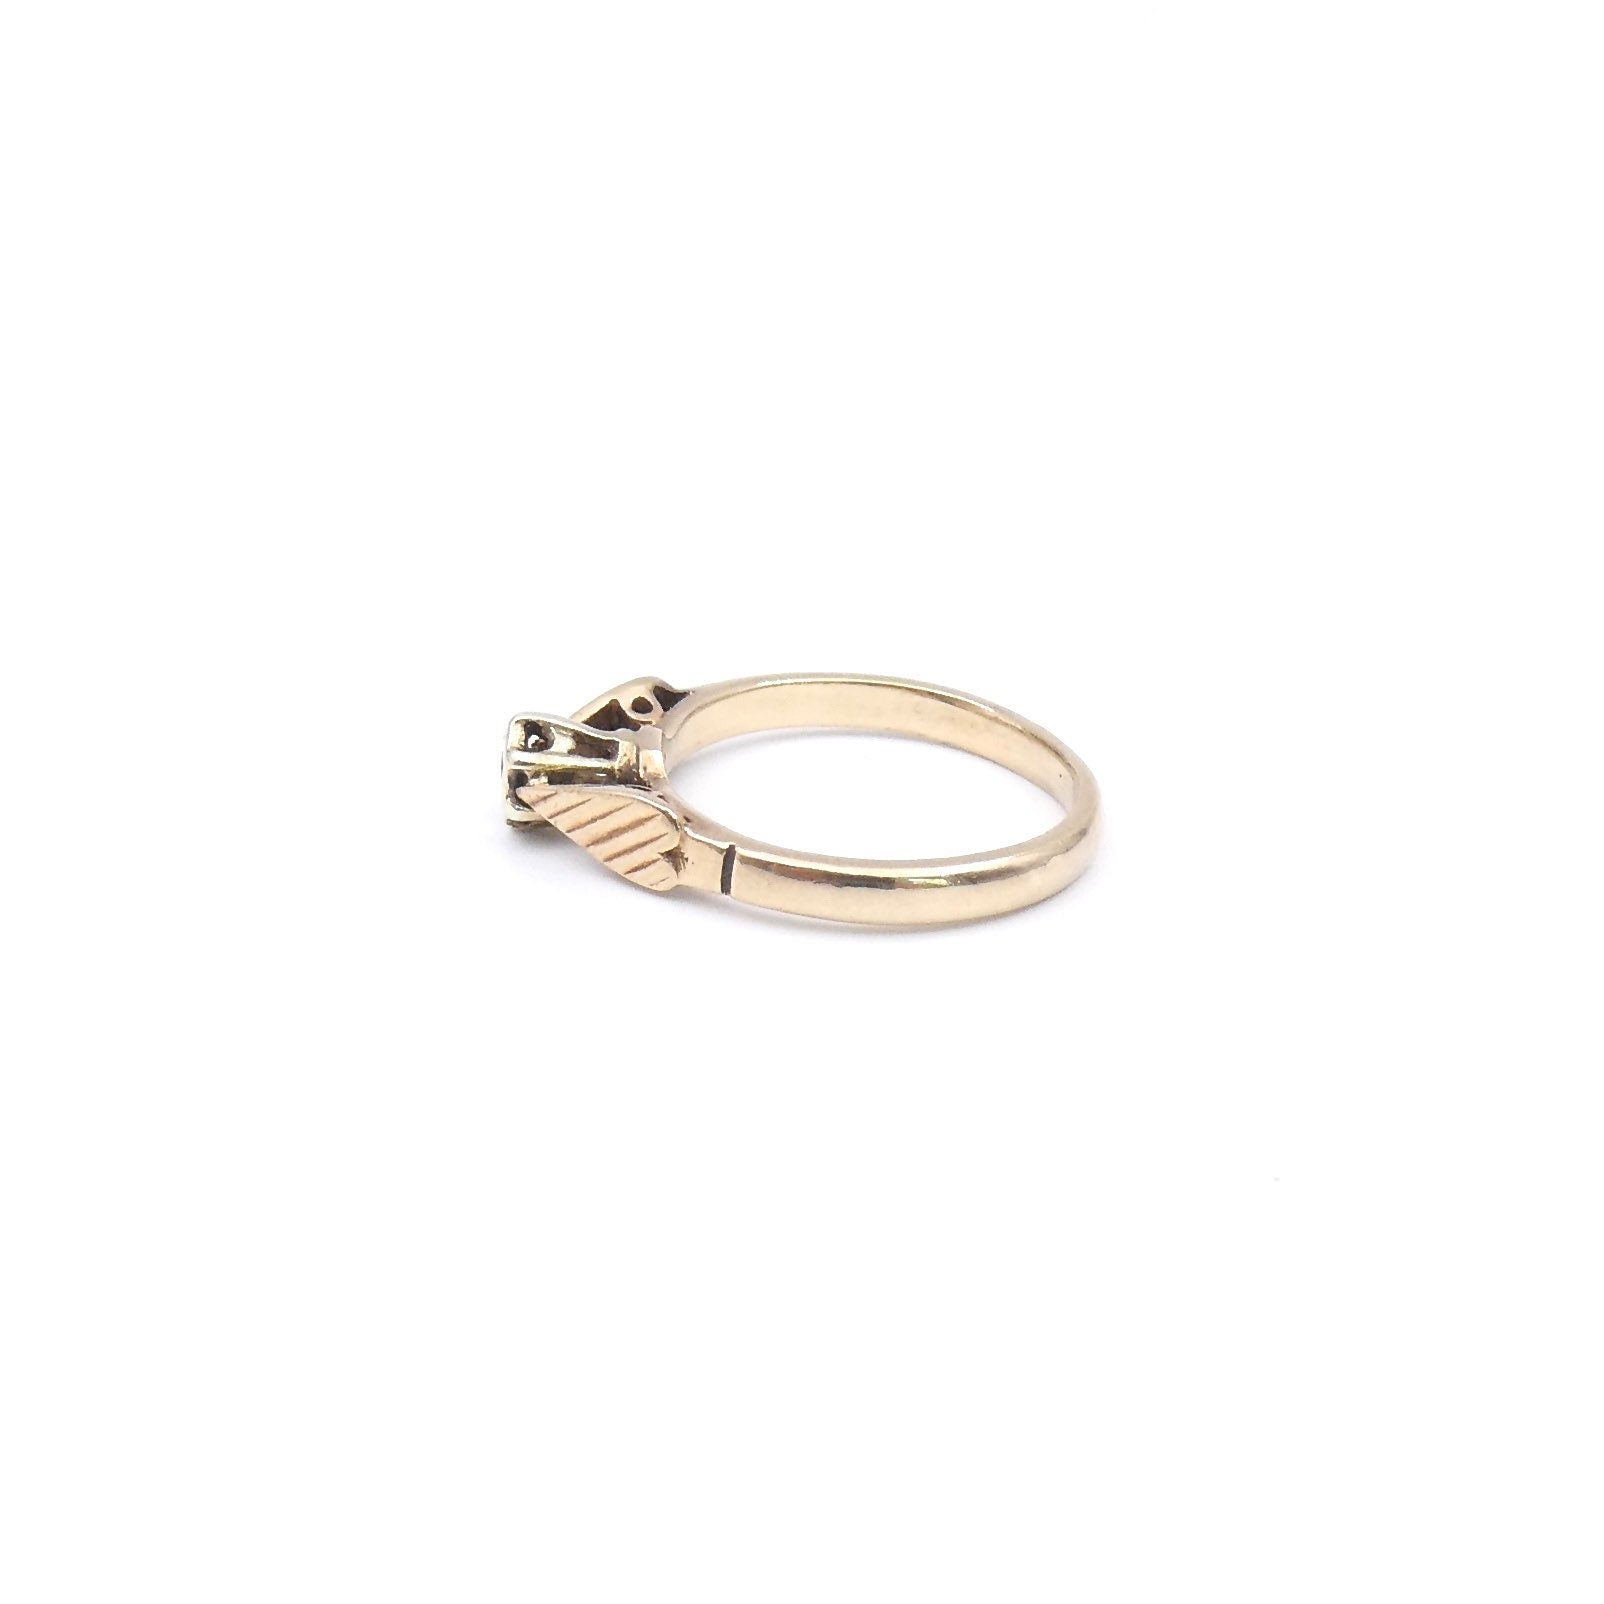 Vintage diamond solitaire ring, a small diamond ring set in 9kt gold with patterned hearts. - Collected